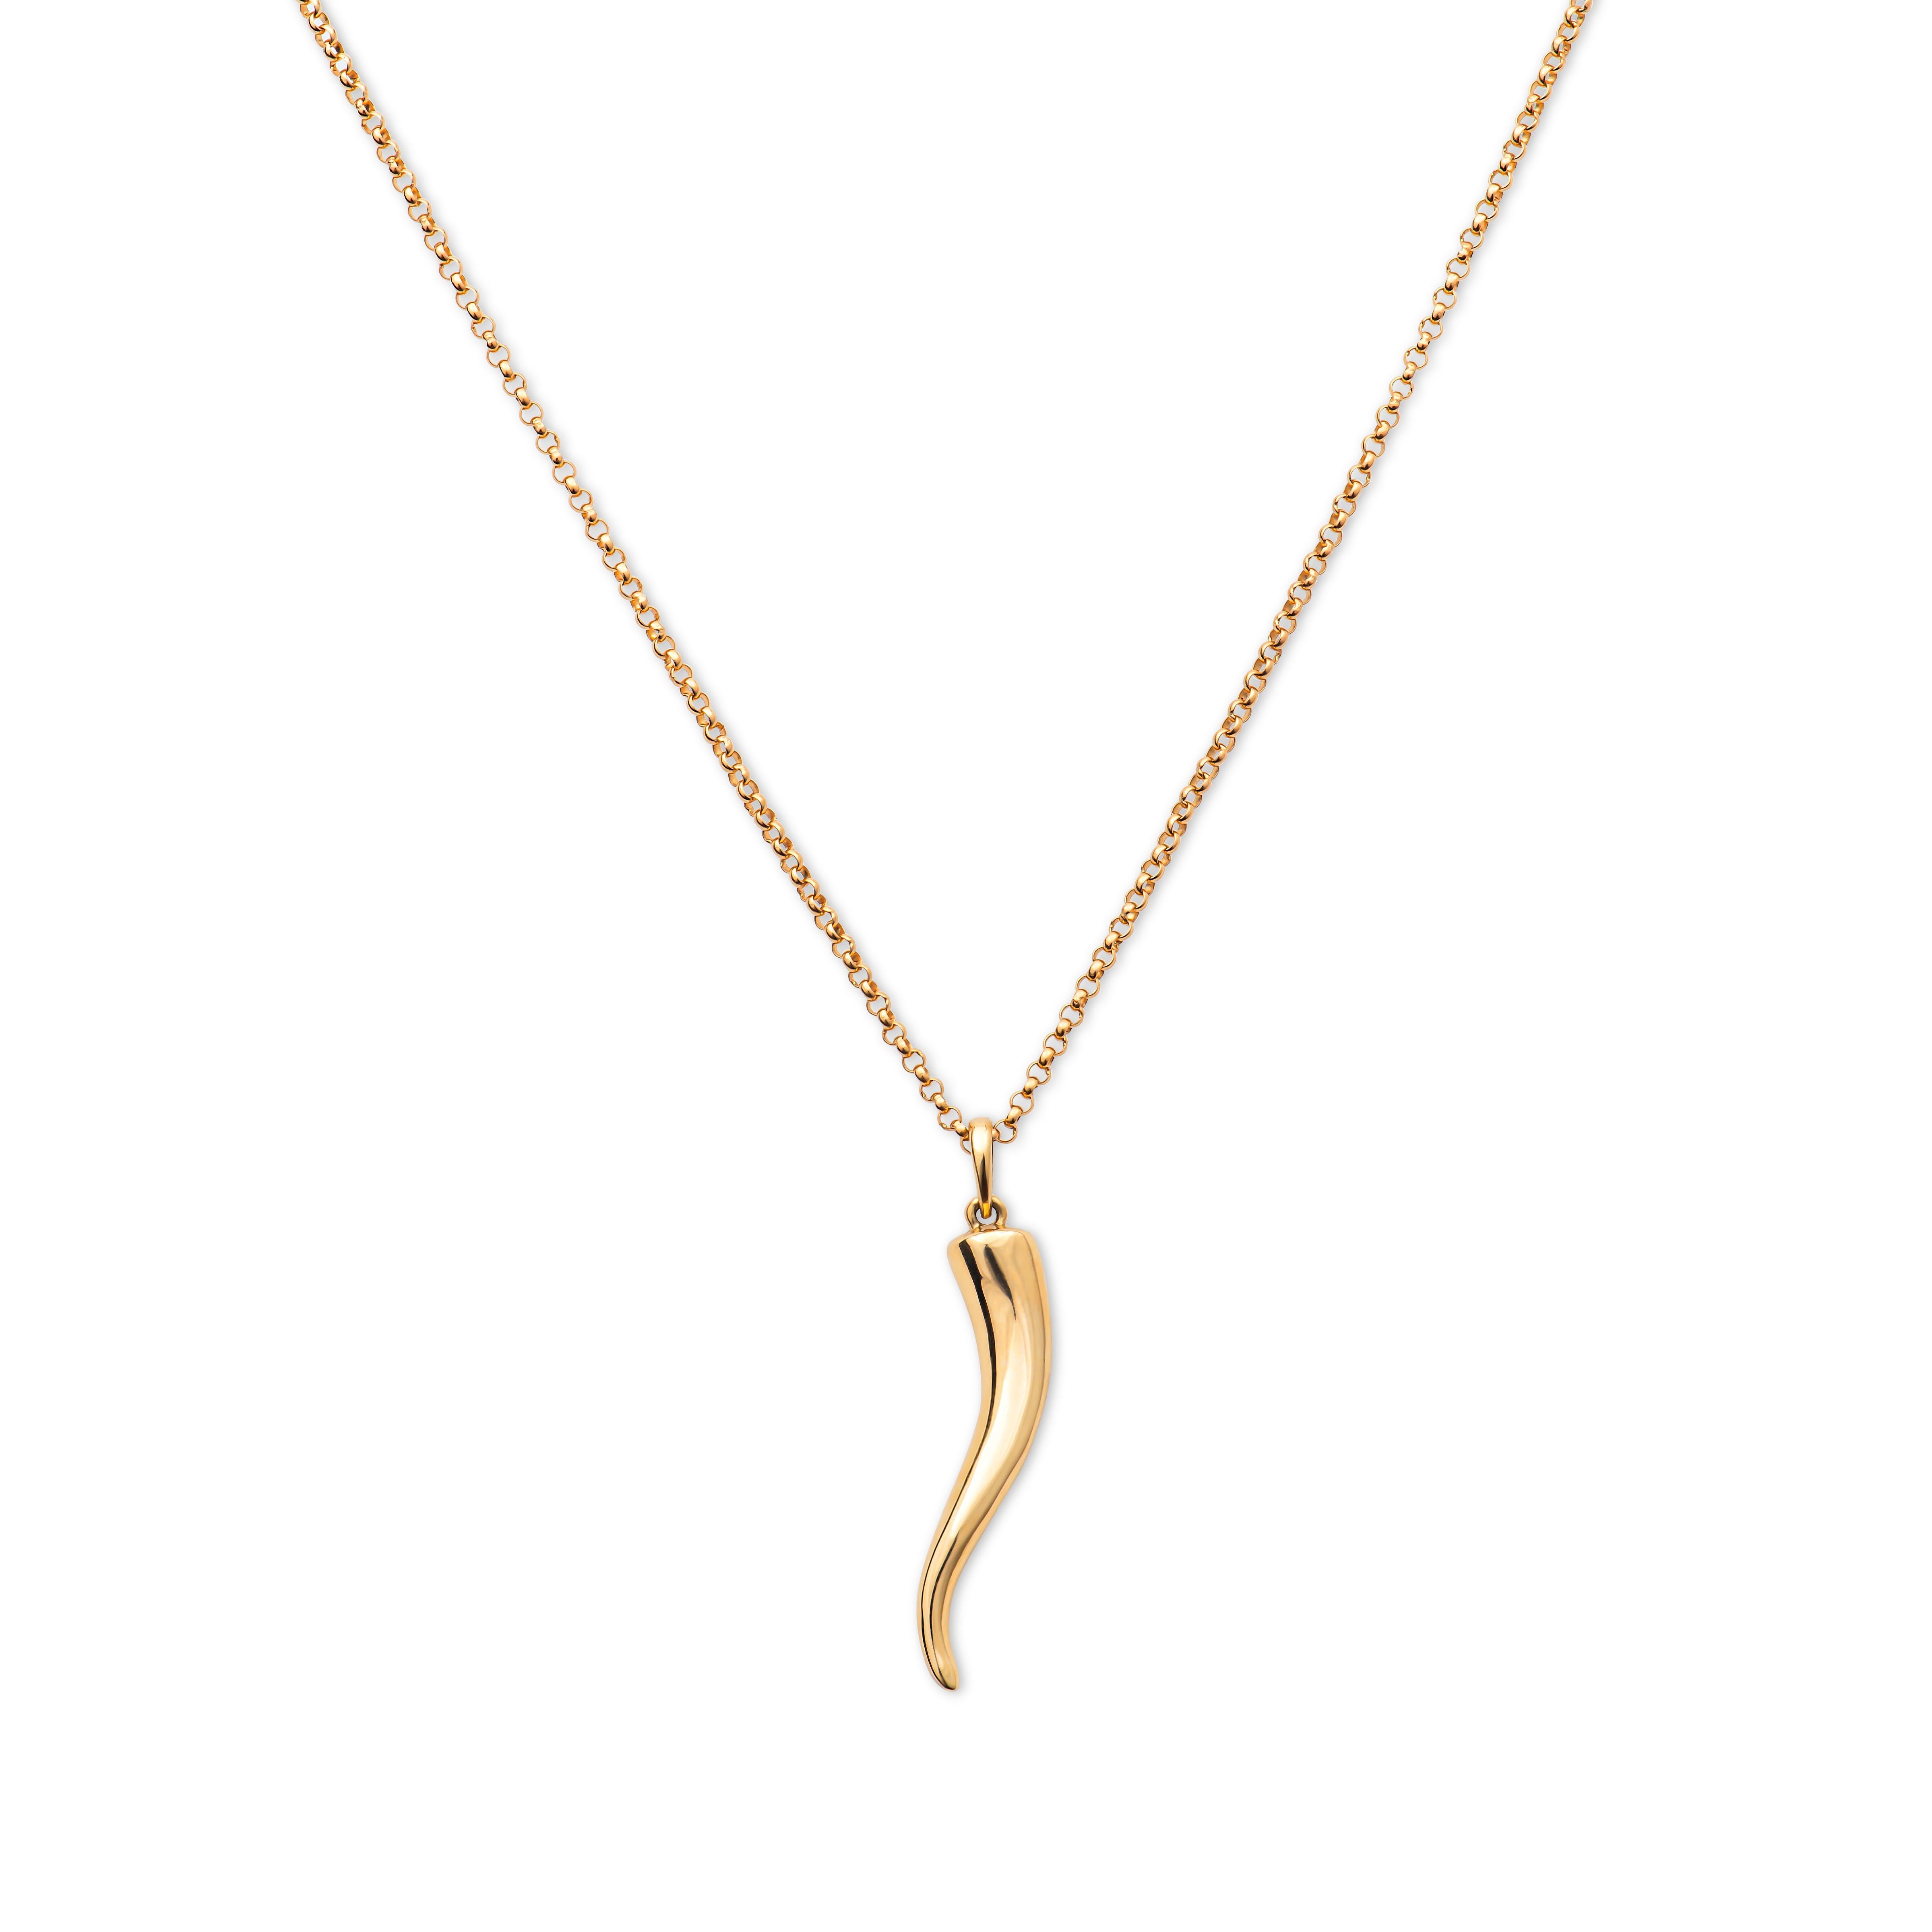 This beautiful cornicello horn pendant is an Italian good luck charm and talisman of protection against evil eye and bad luck. It is perfect Italian craftsmanship in 14 karat yellow gold.

Measurement : Length approximately 1.25 Inches

Chain not